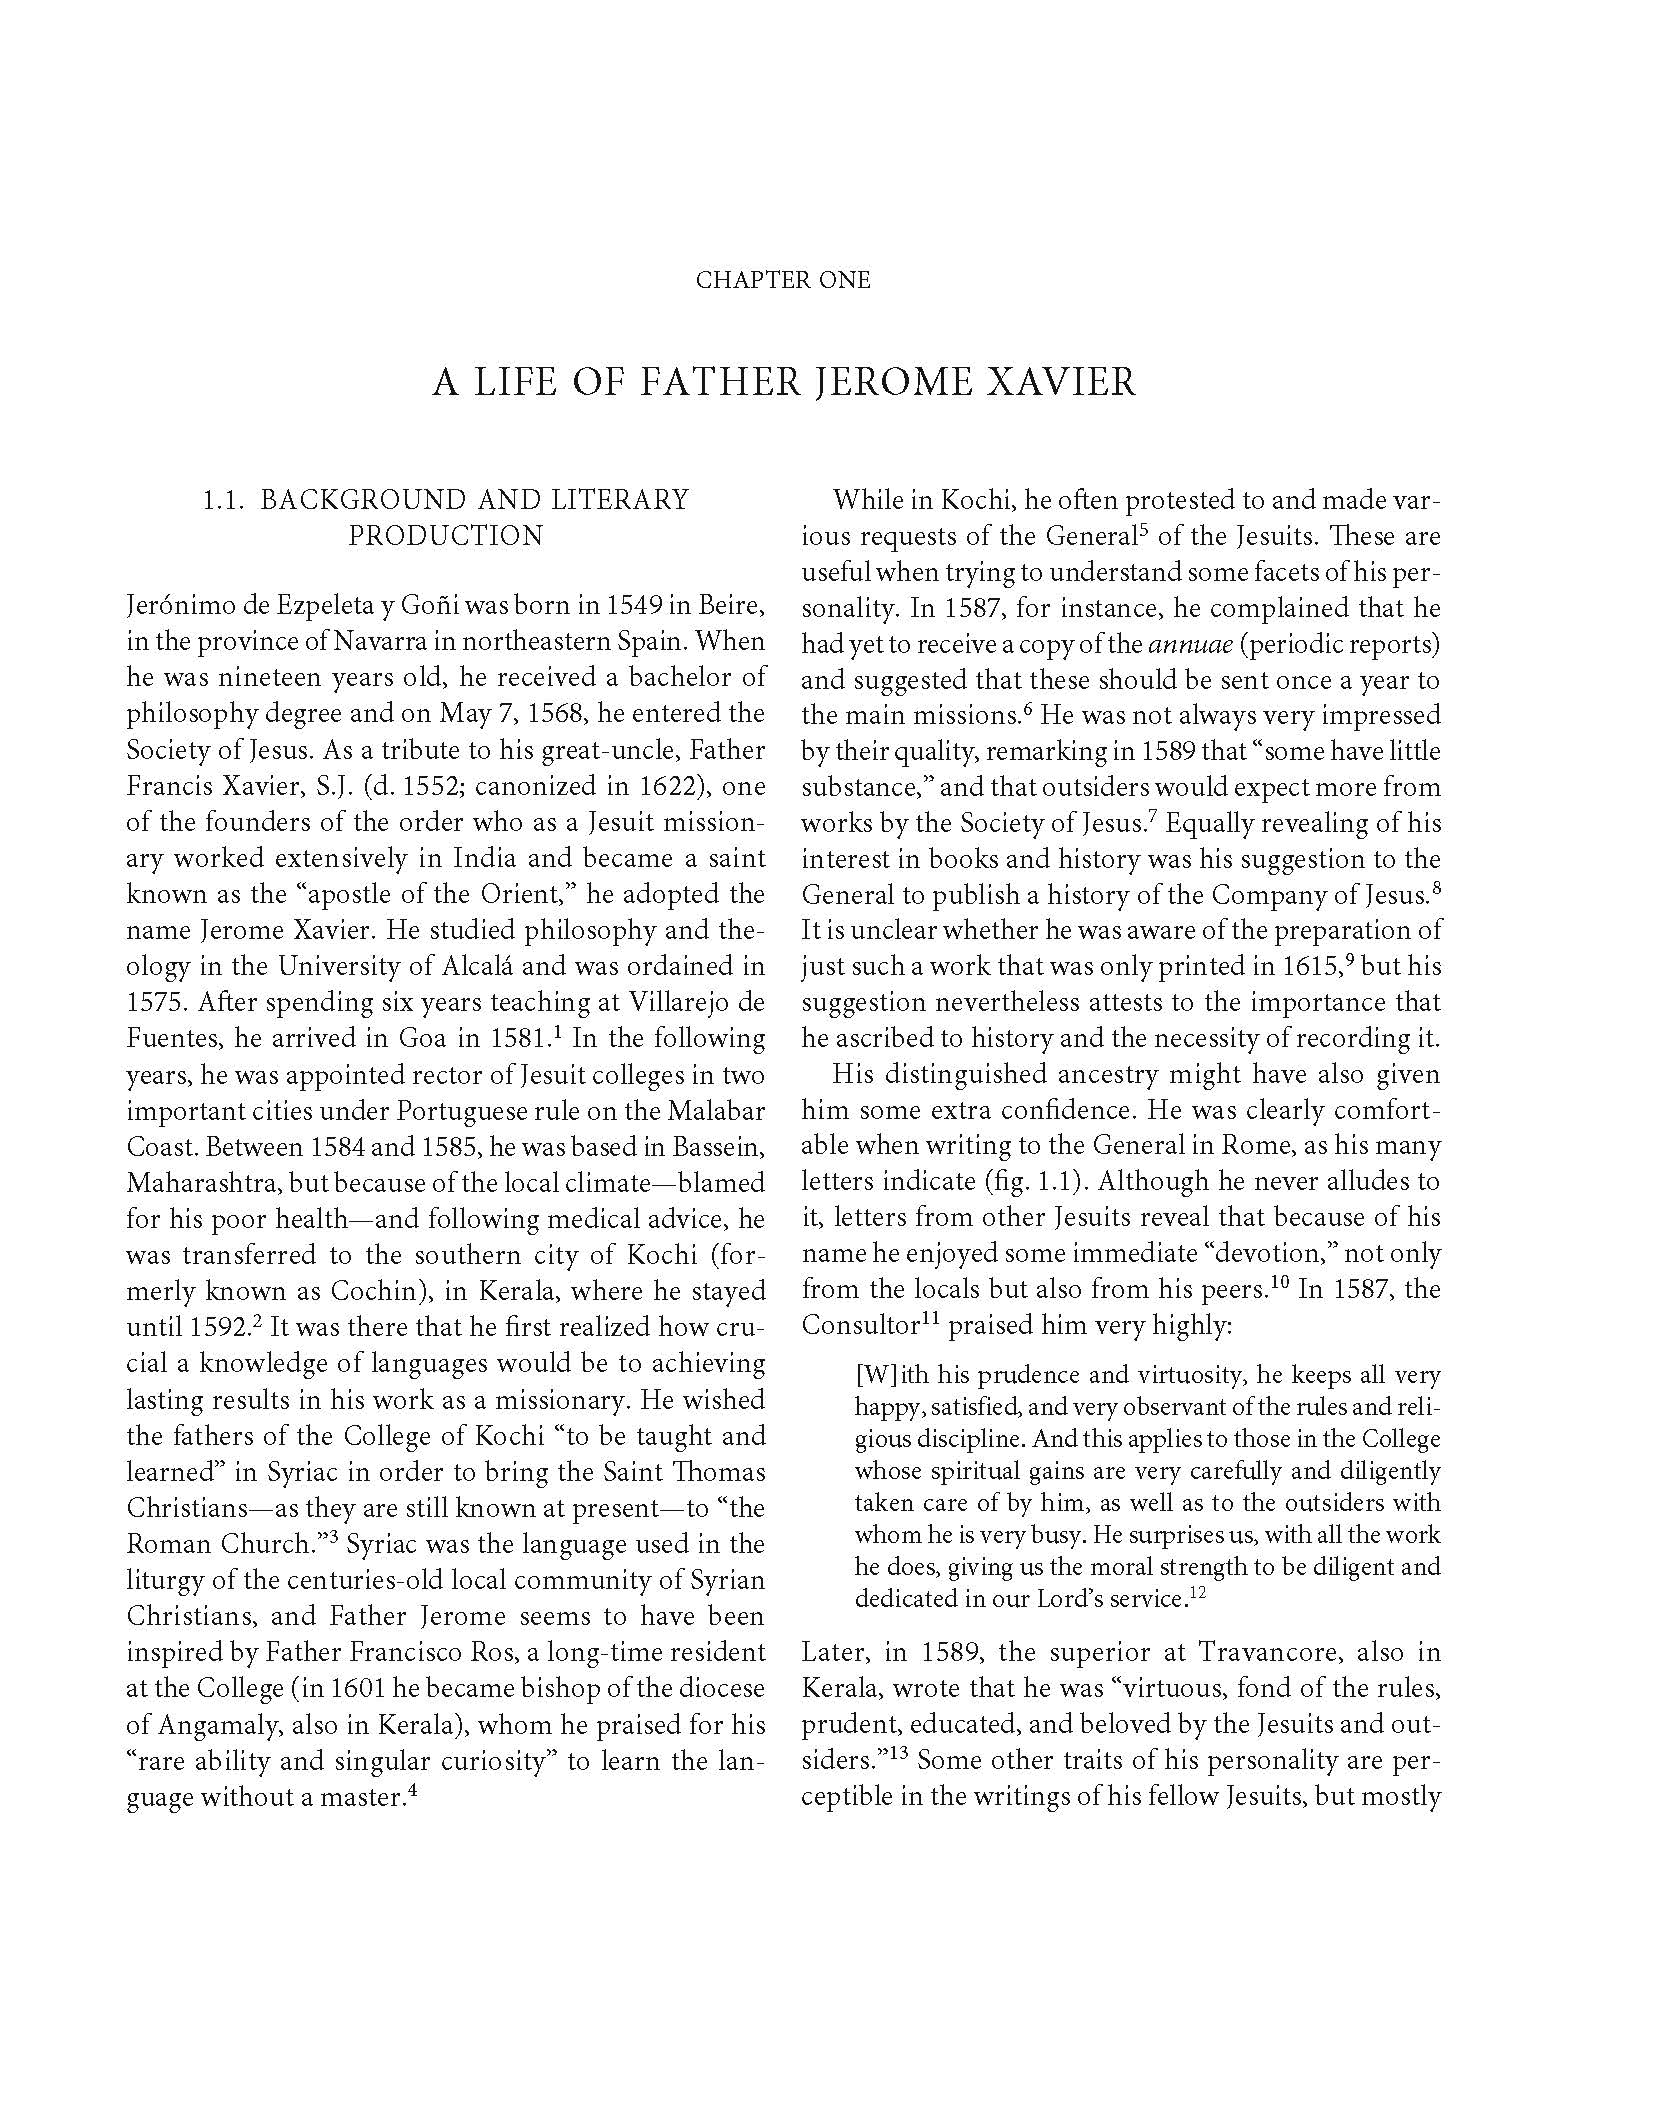 Chapter 1: A Life of Father Jerome Xavier